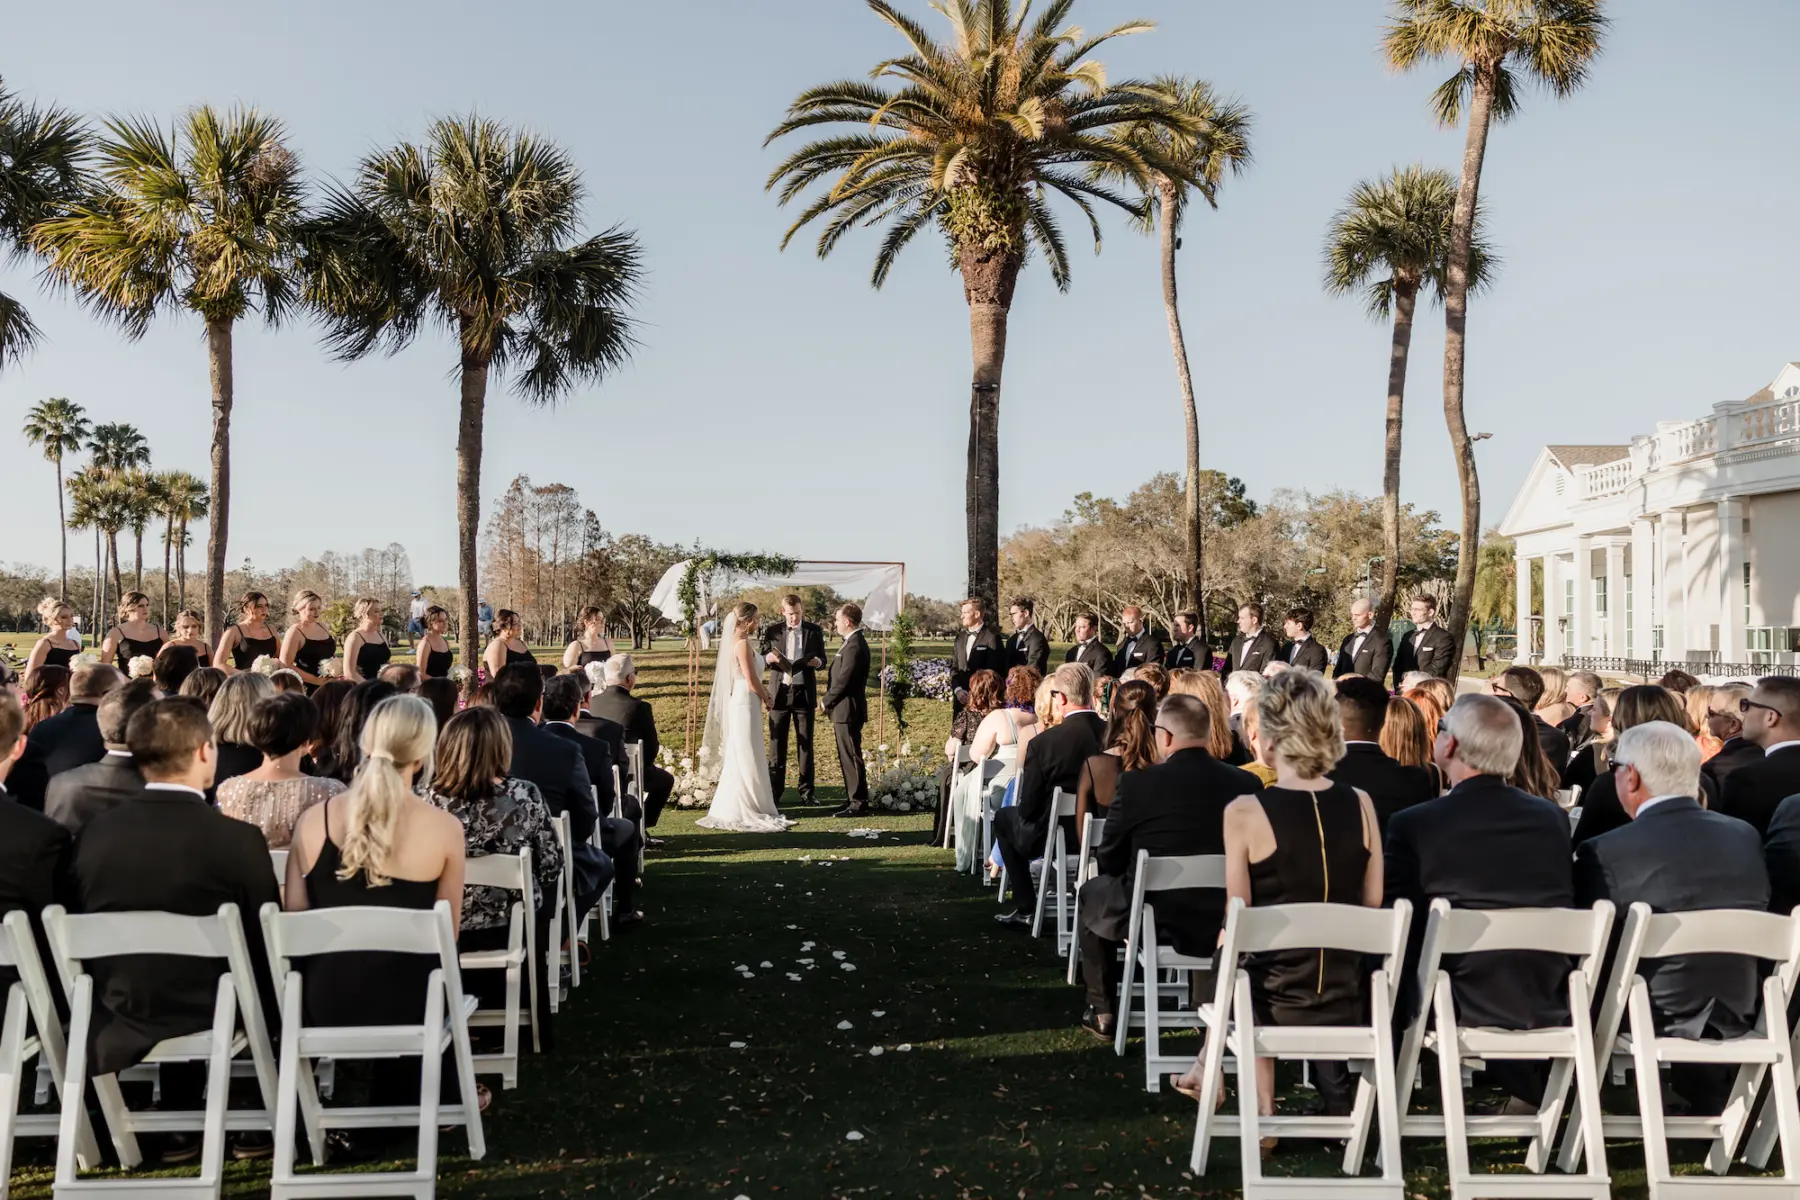 Timeless Outdoor Black and White Spring Golf Course Wedding Ceremony Inspiration | South Tampa Venue Palma Ceia Golf and Country Club | Planner Oh My Occasions